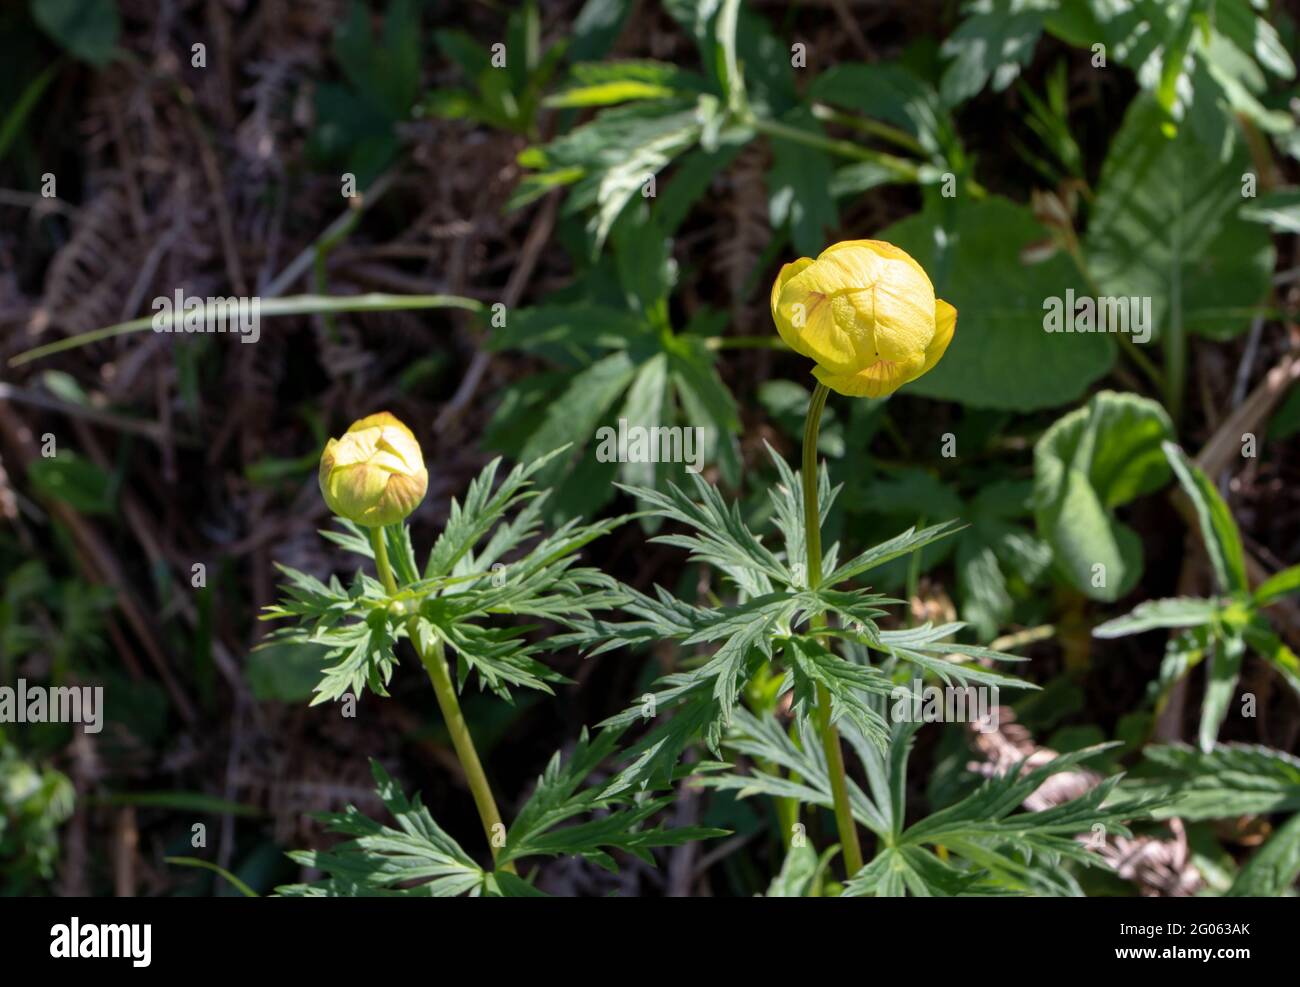 Trollius europaeus the globeflower bright yellow globe shaped flowers on the spring meadow. Perennial flowering plant of the Ranunculaceae family. Stock Photo